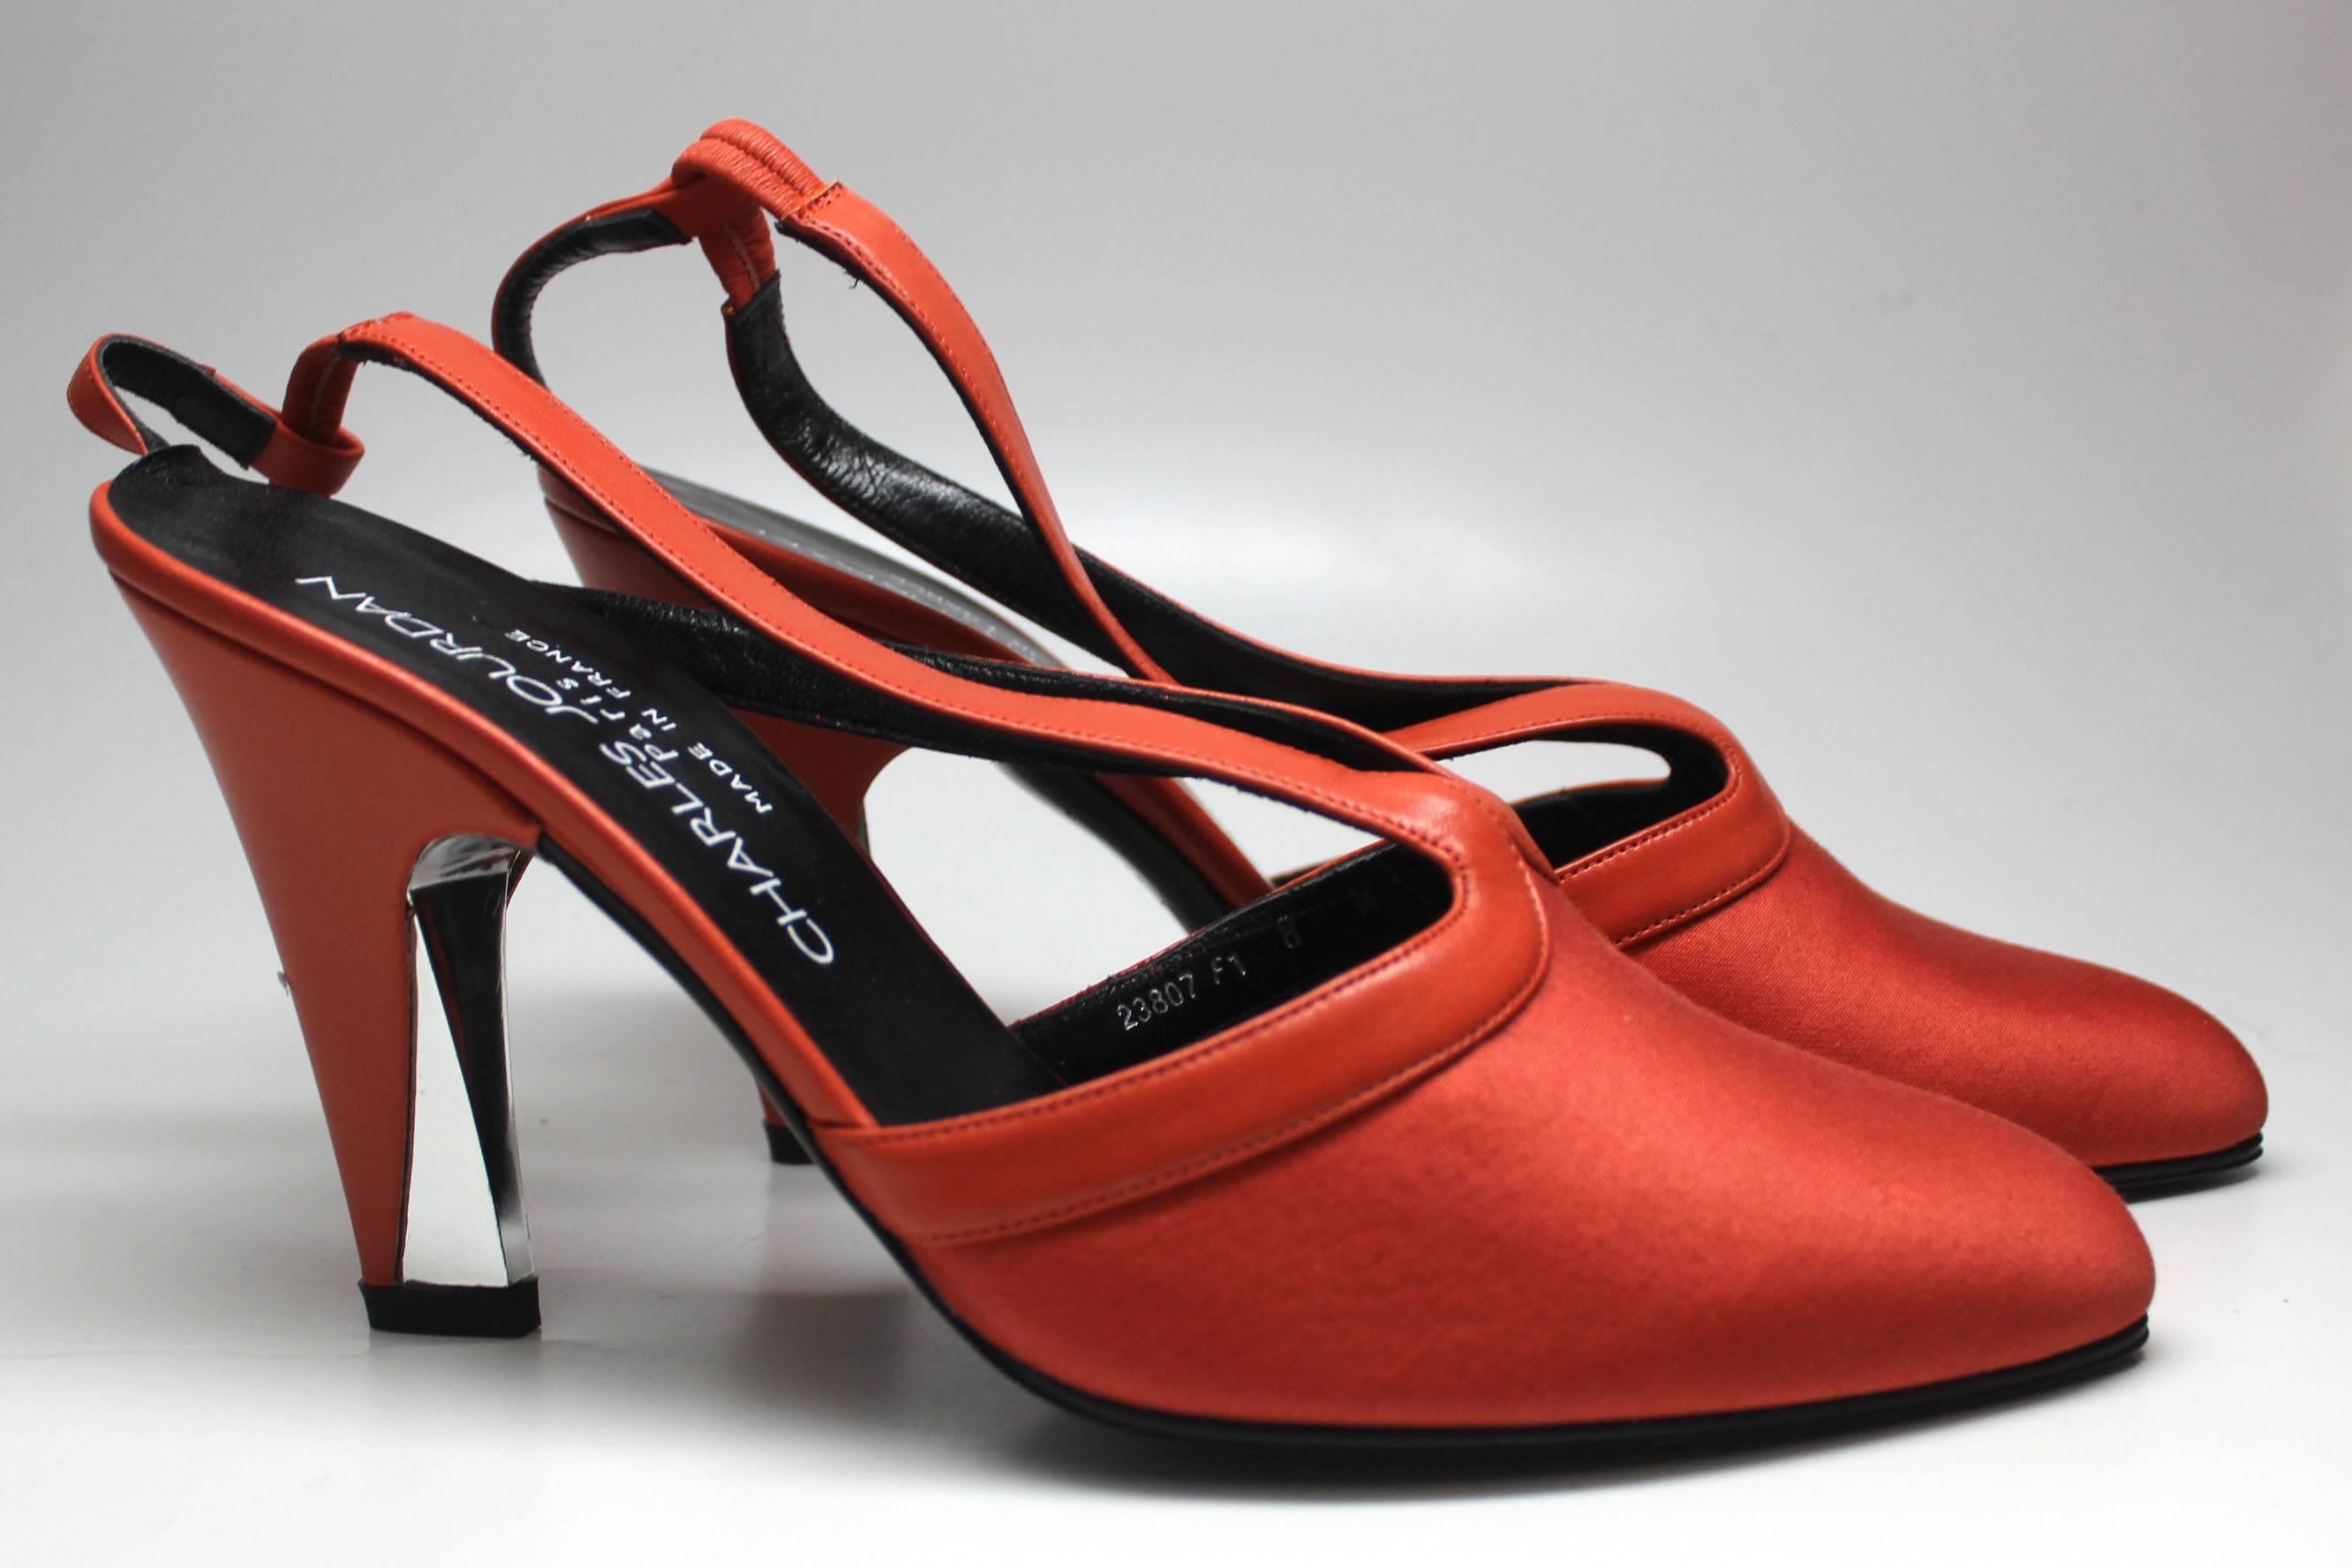 Charles Jourdan Paris - Made in France
Orange leather trims the shoe and slings back to the ankle. The heel is half mirror, half orange leather. The toe is a made from a beautifully complementing red-orange satin. The mix of materials gives a truly